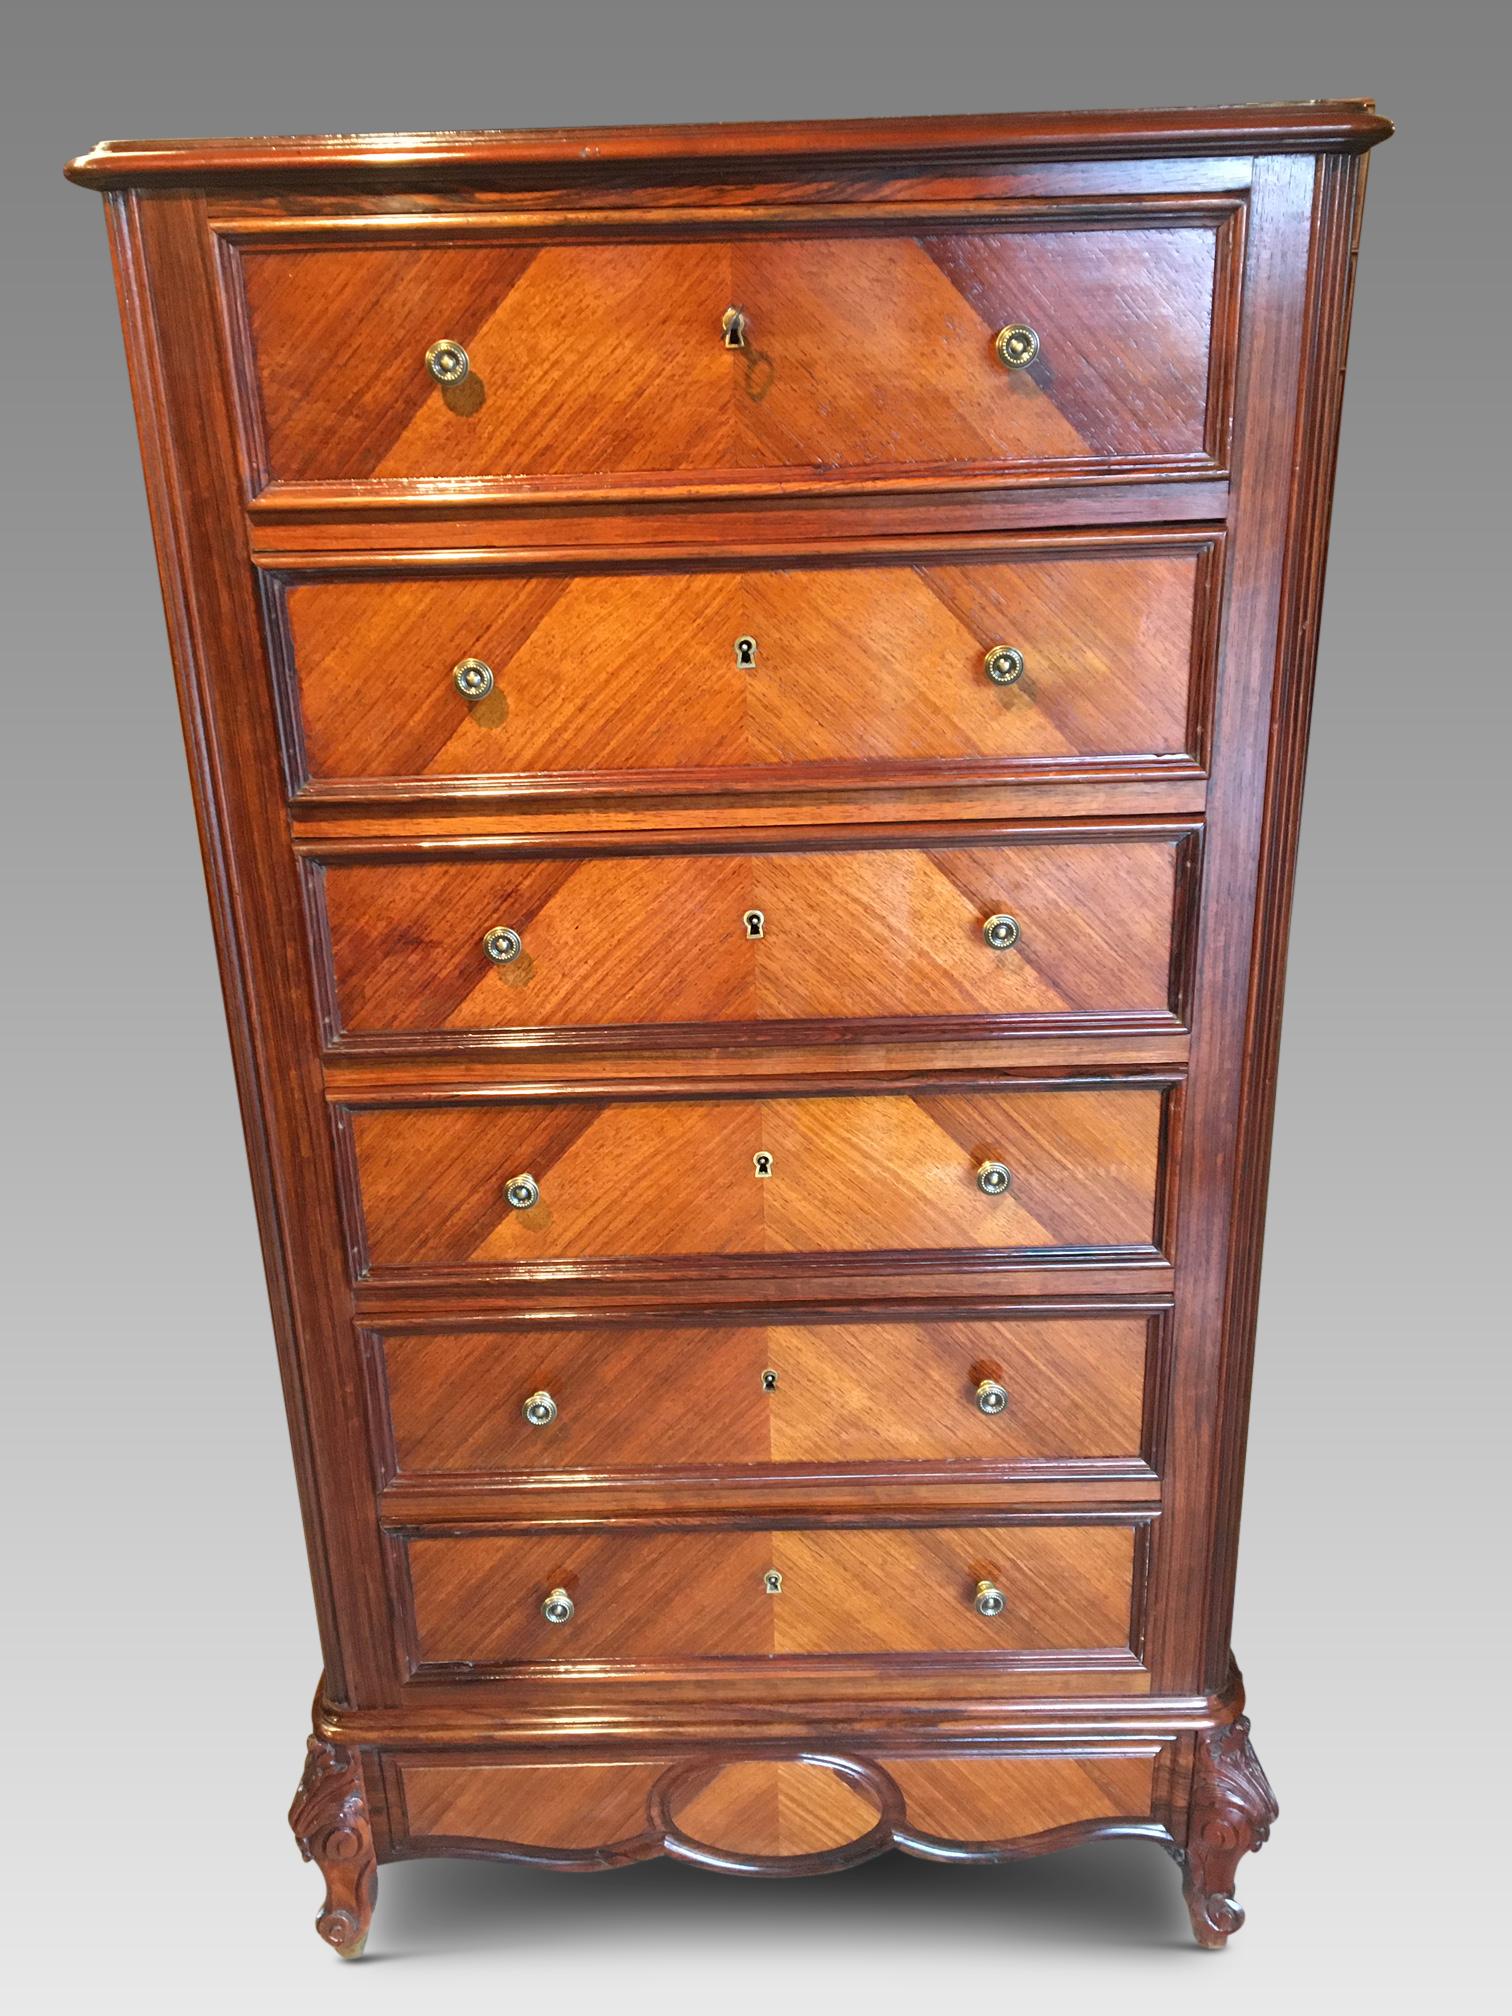 Attractive tall 19th century walnut chest drawers on stylish cabriole legs, French, circa 1880.
Frequently referred to as a Semainier, this delightful chest is in excellent condition, having been
cleaned and wax polished in our workshop, ensuring